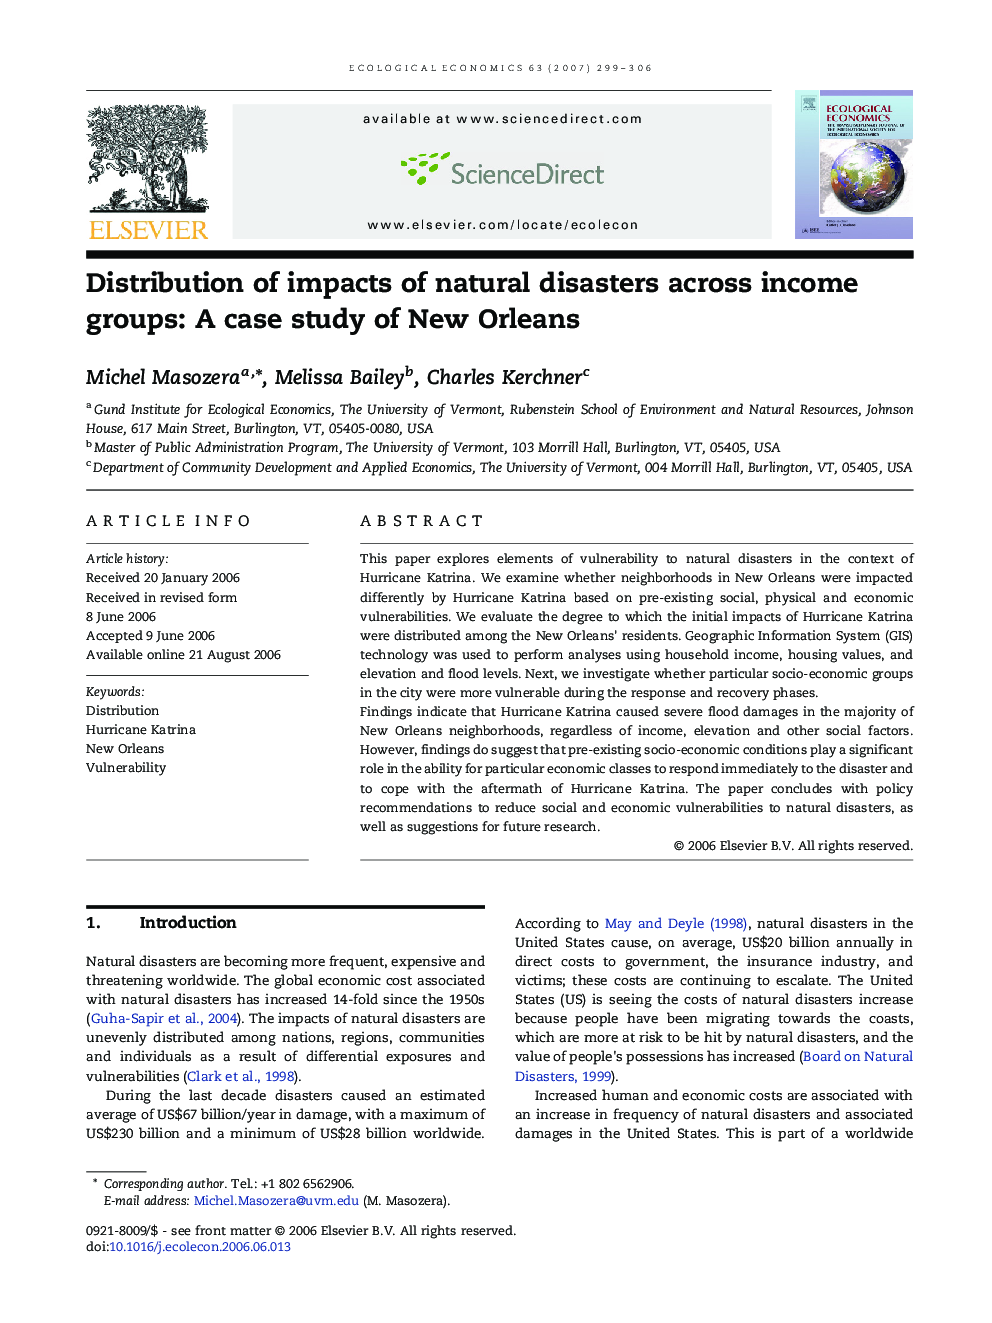 Distribution of impacts of natural disasters across income groups: A case study of New Orleans